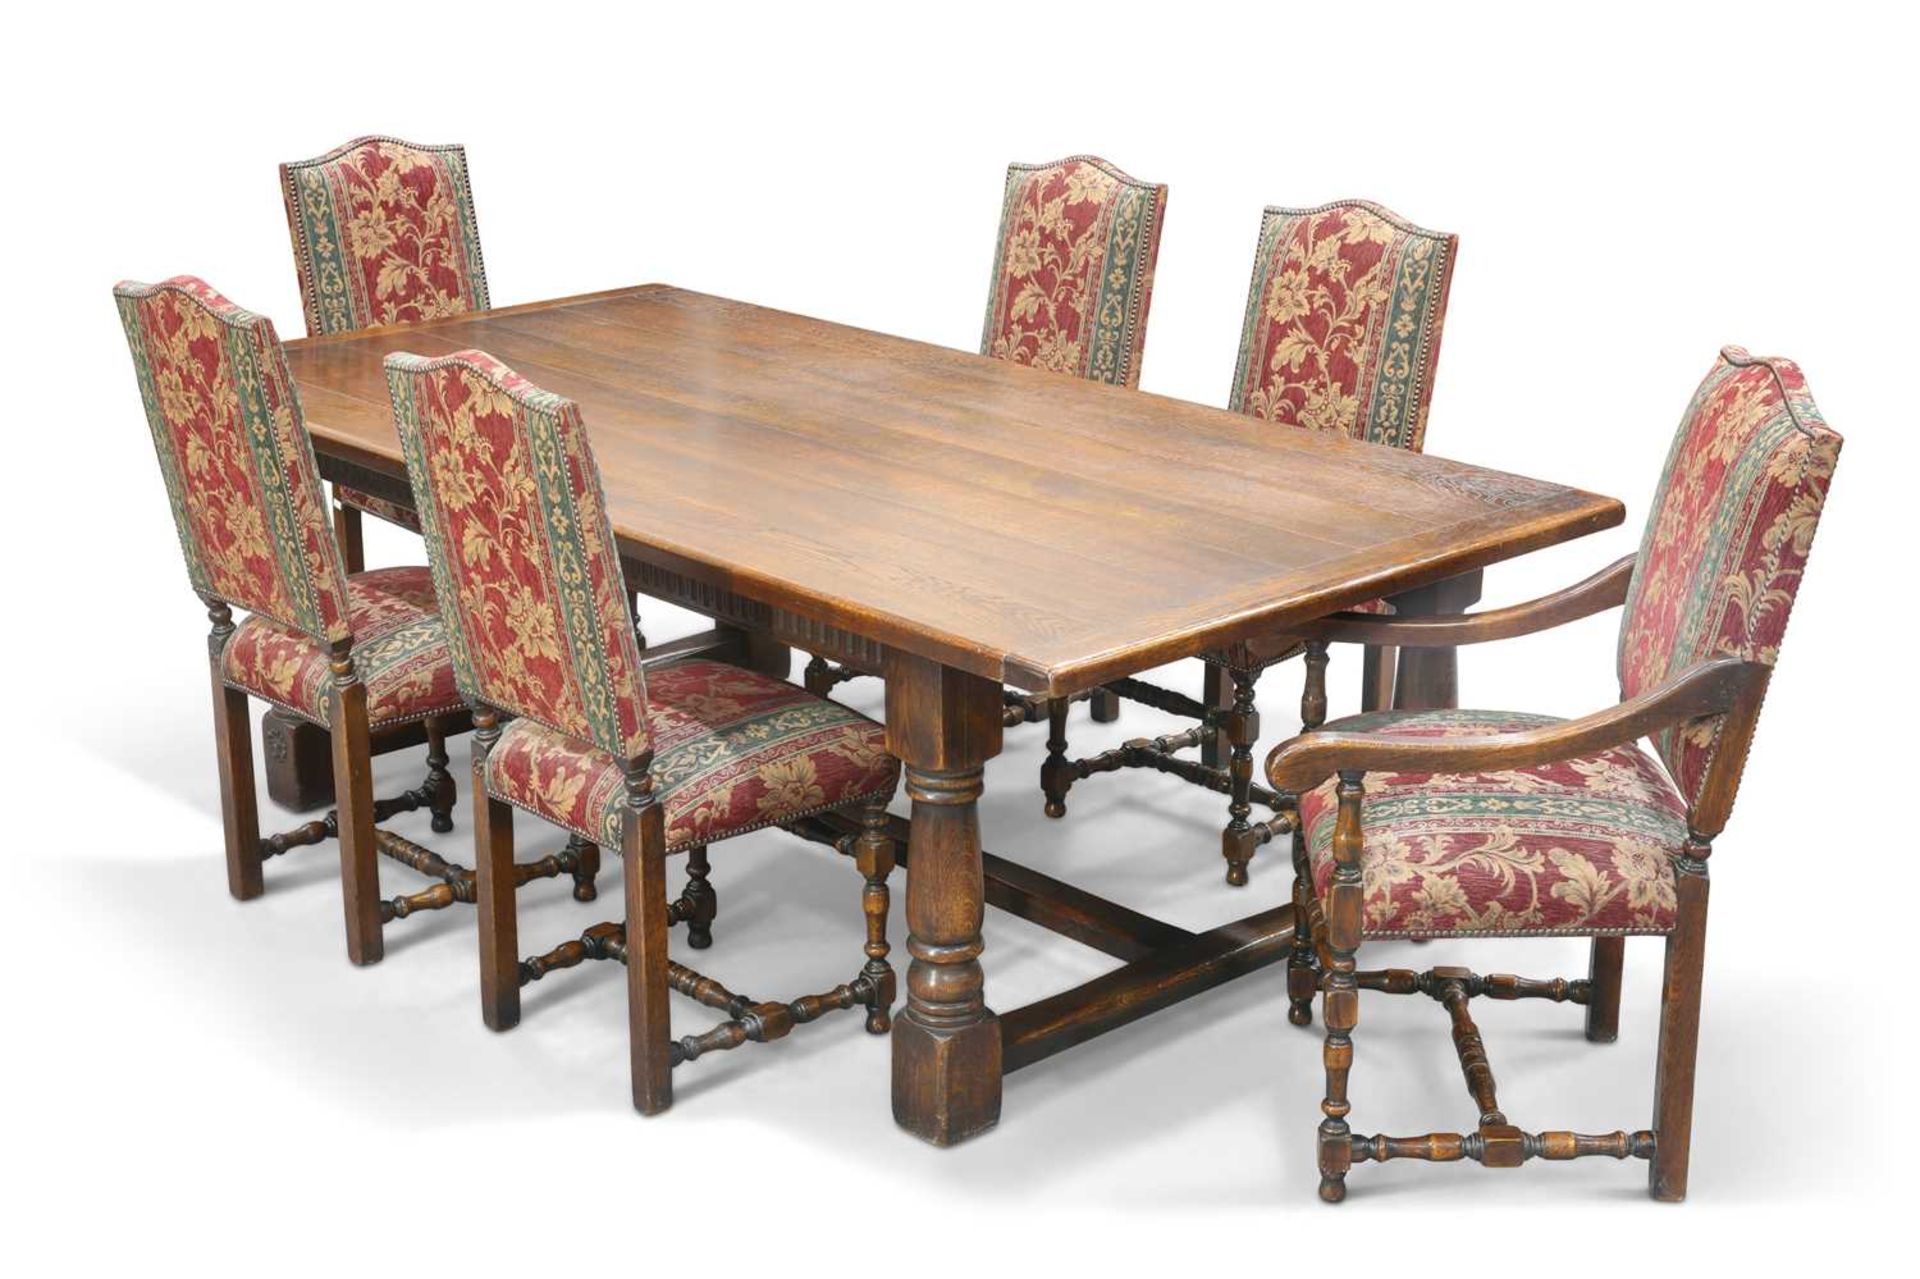 ROYAL OAK FURNITURE COMPANY, A PERIOD-STYLE OAK REFECTORY DINING TABLE AND EIGHT CHAIRS